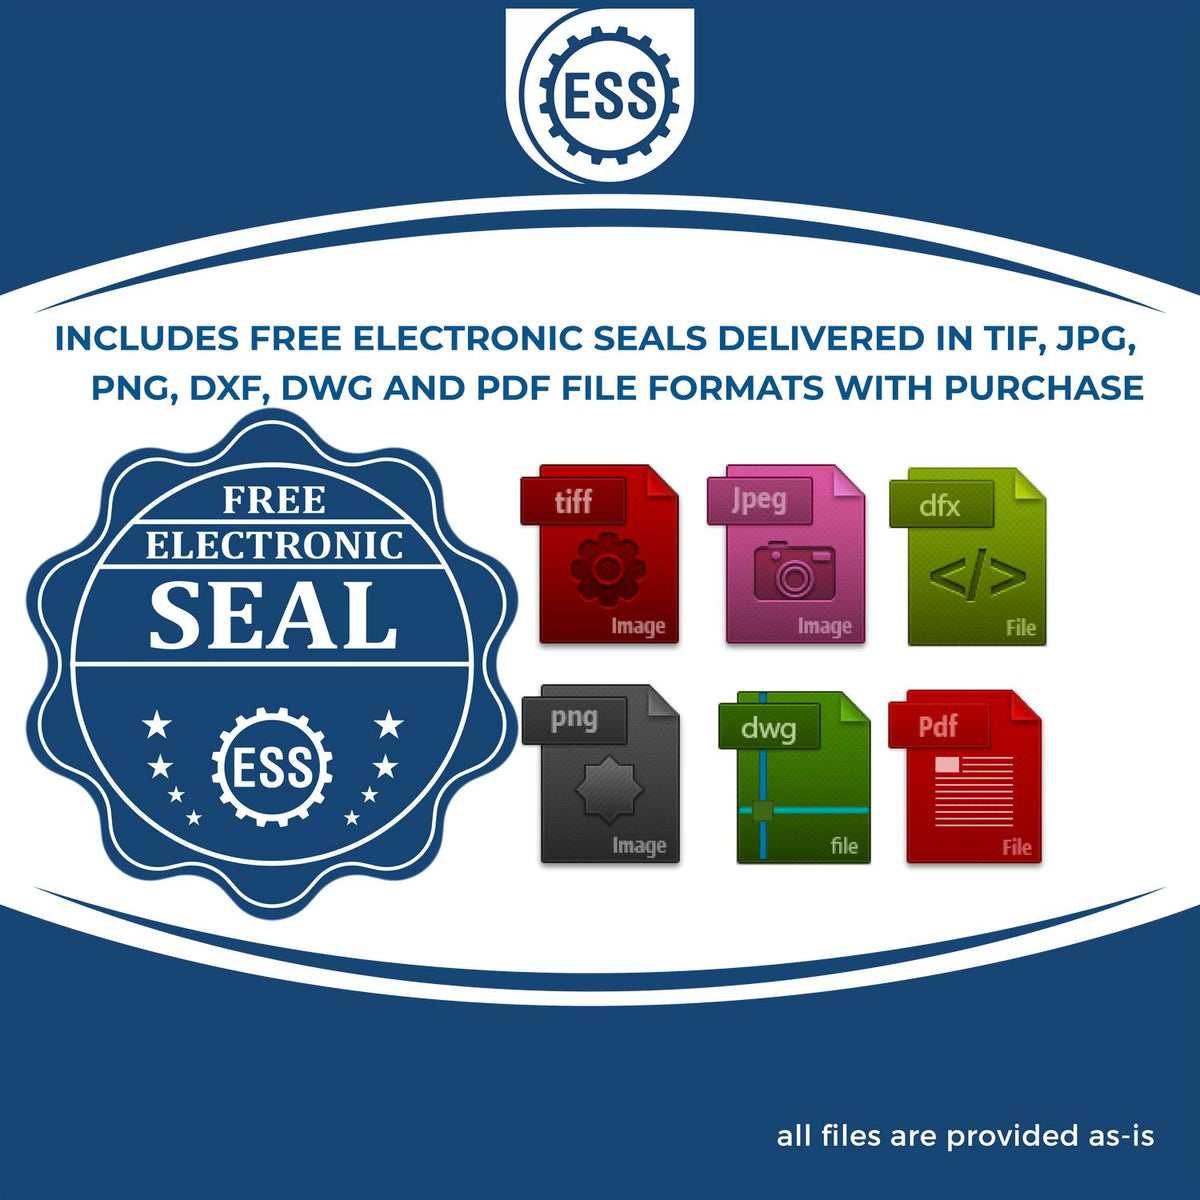 An infographic for the free electronic seal for the Wisconsin Geologist Desk Seal illustrating the different file type icons such as DXF, DWG, TIF, JPG and PNG.